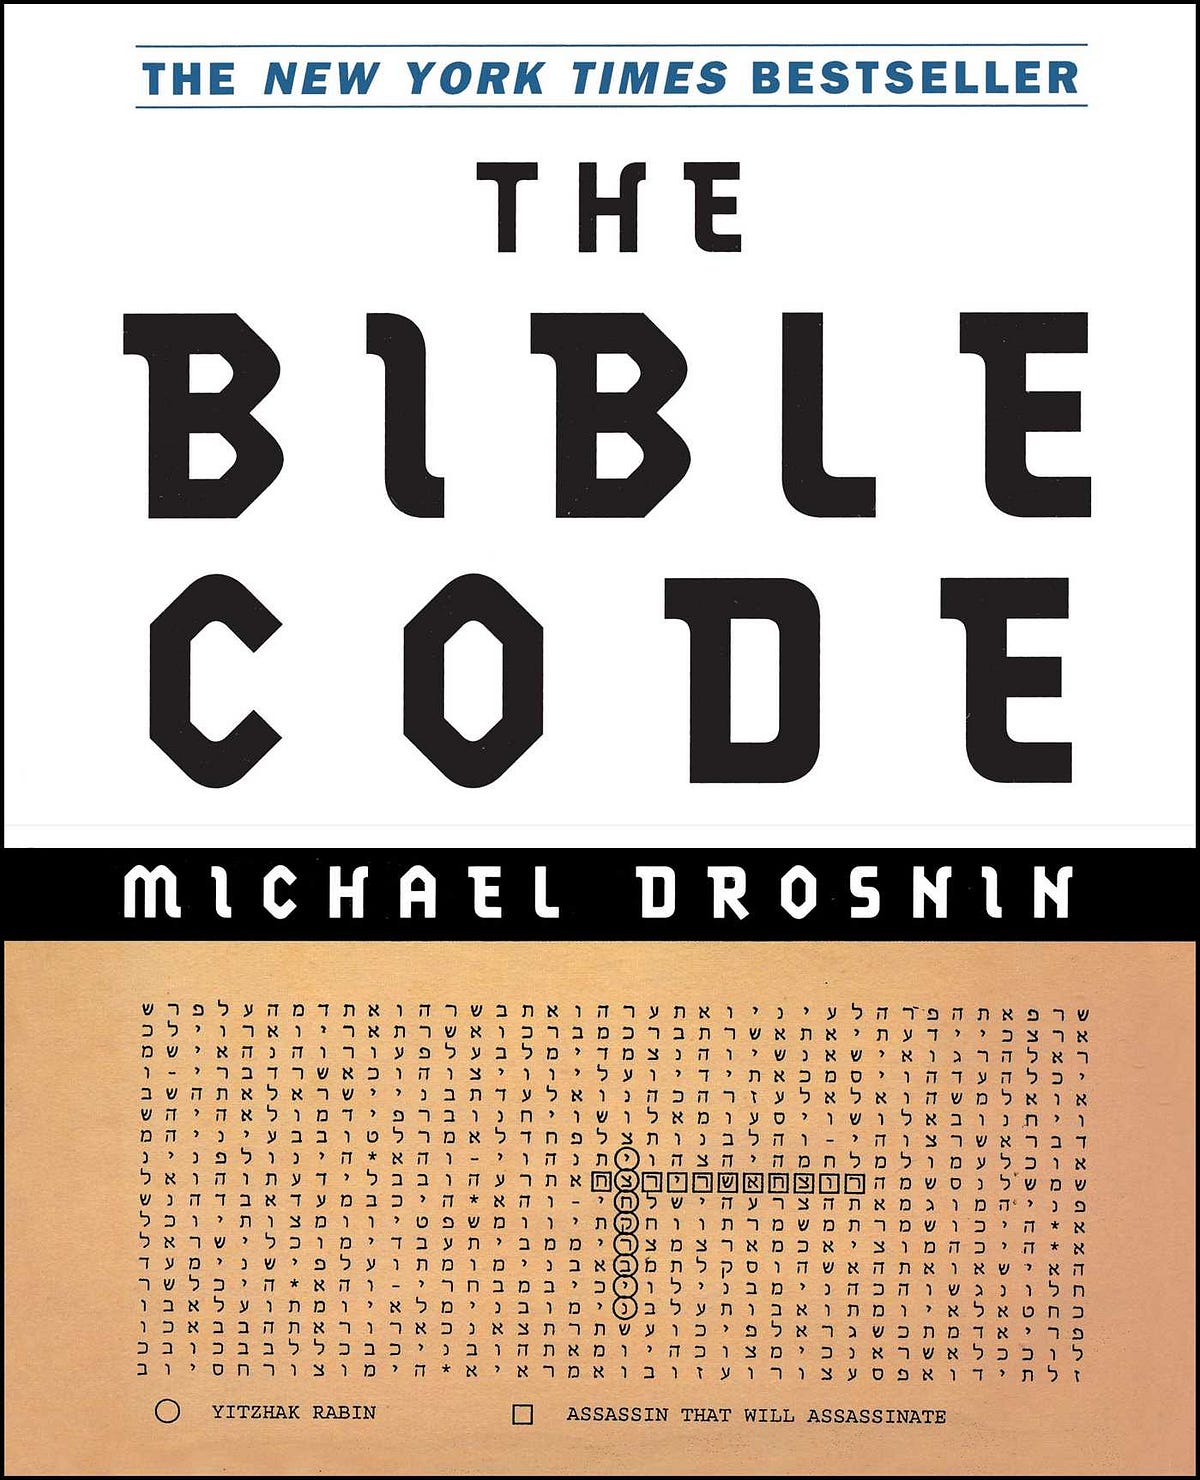 bible-codes-making-an-algorithm-to-find-hidden-word-sequences-in-text-by-felcjo-ringo-medium